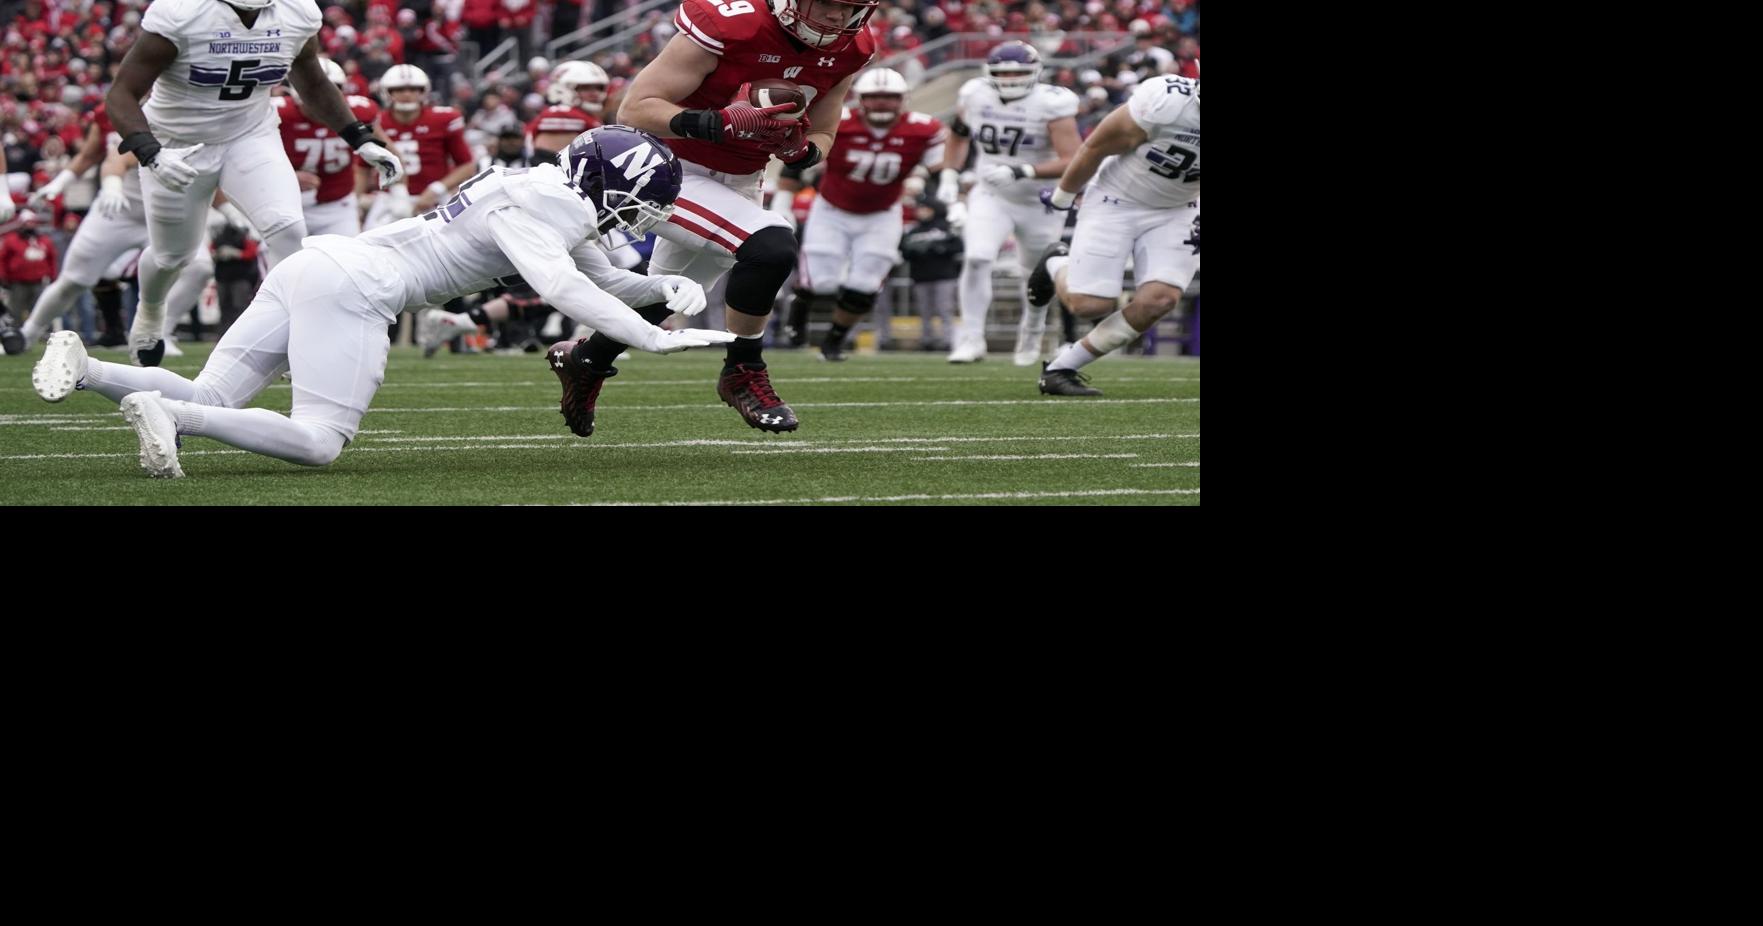 Brady Schipper is the Badgers' No. 2 tailback. Just don't call him that